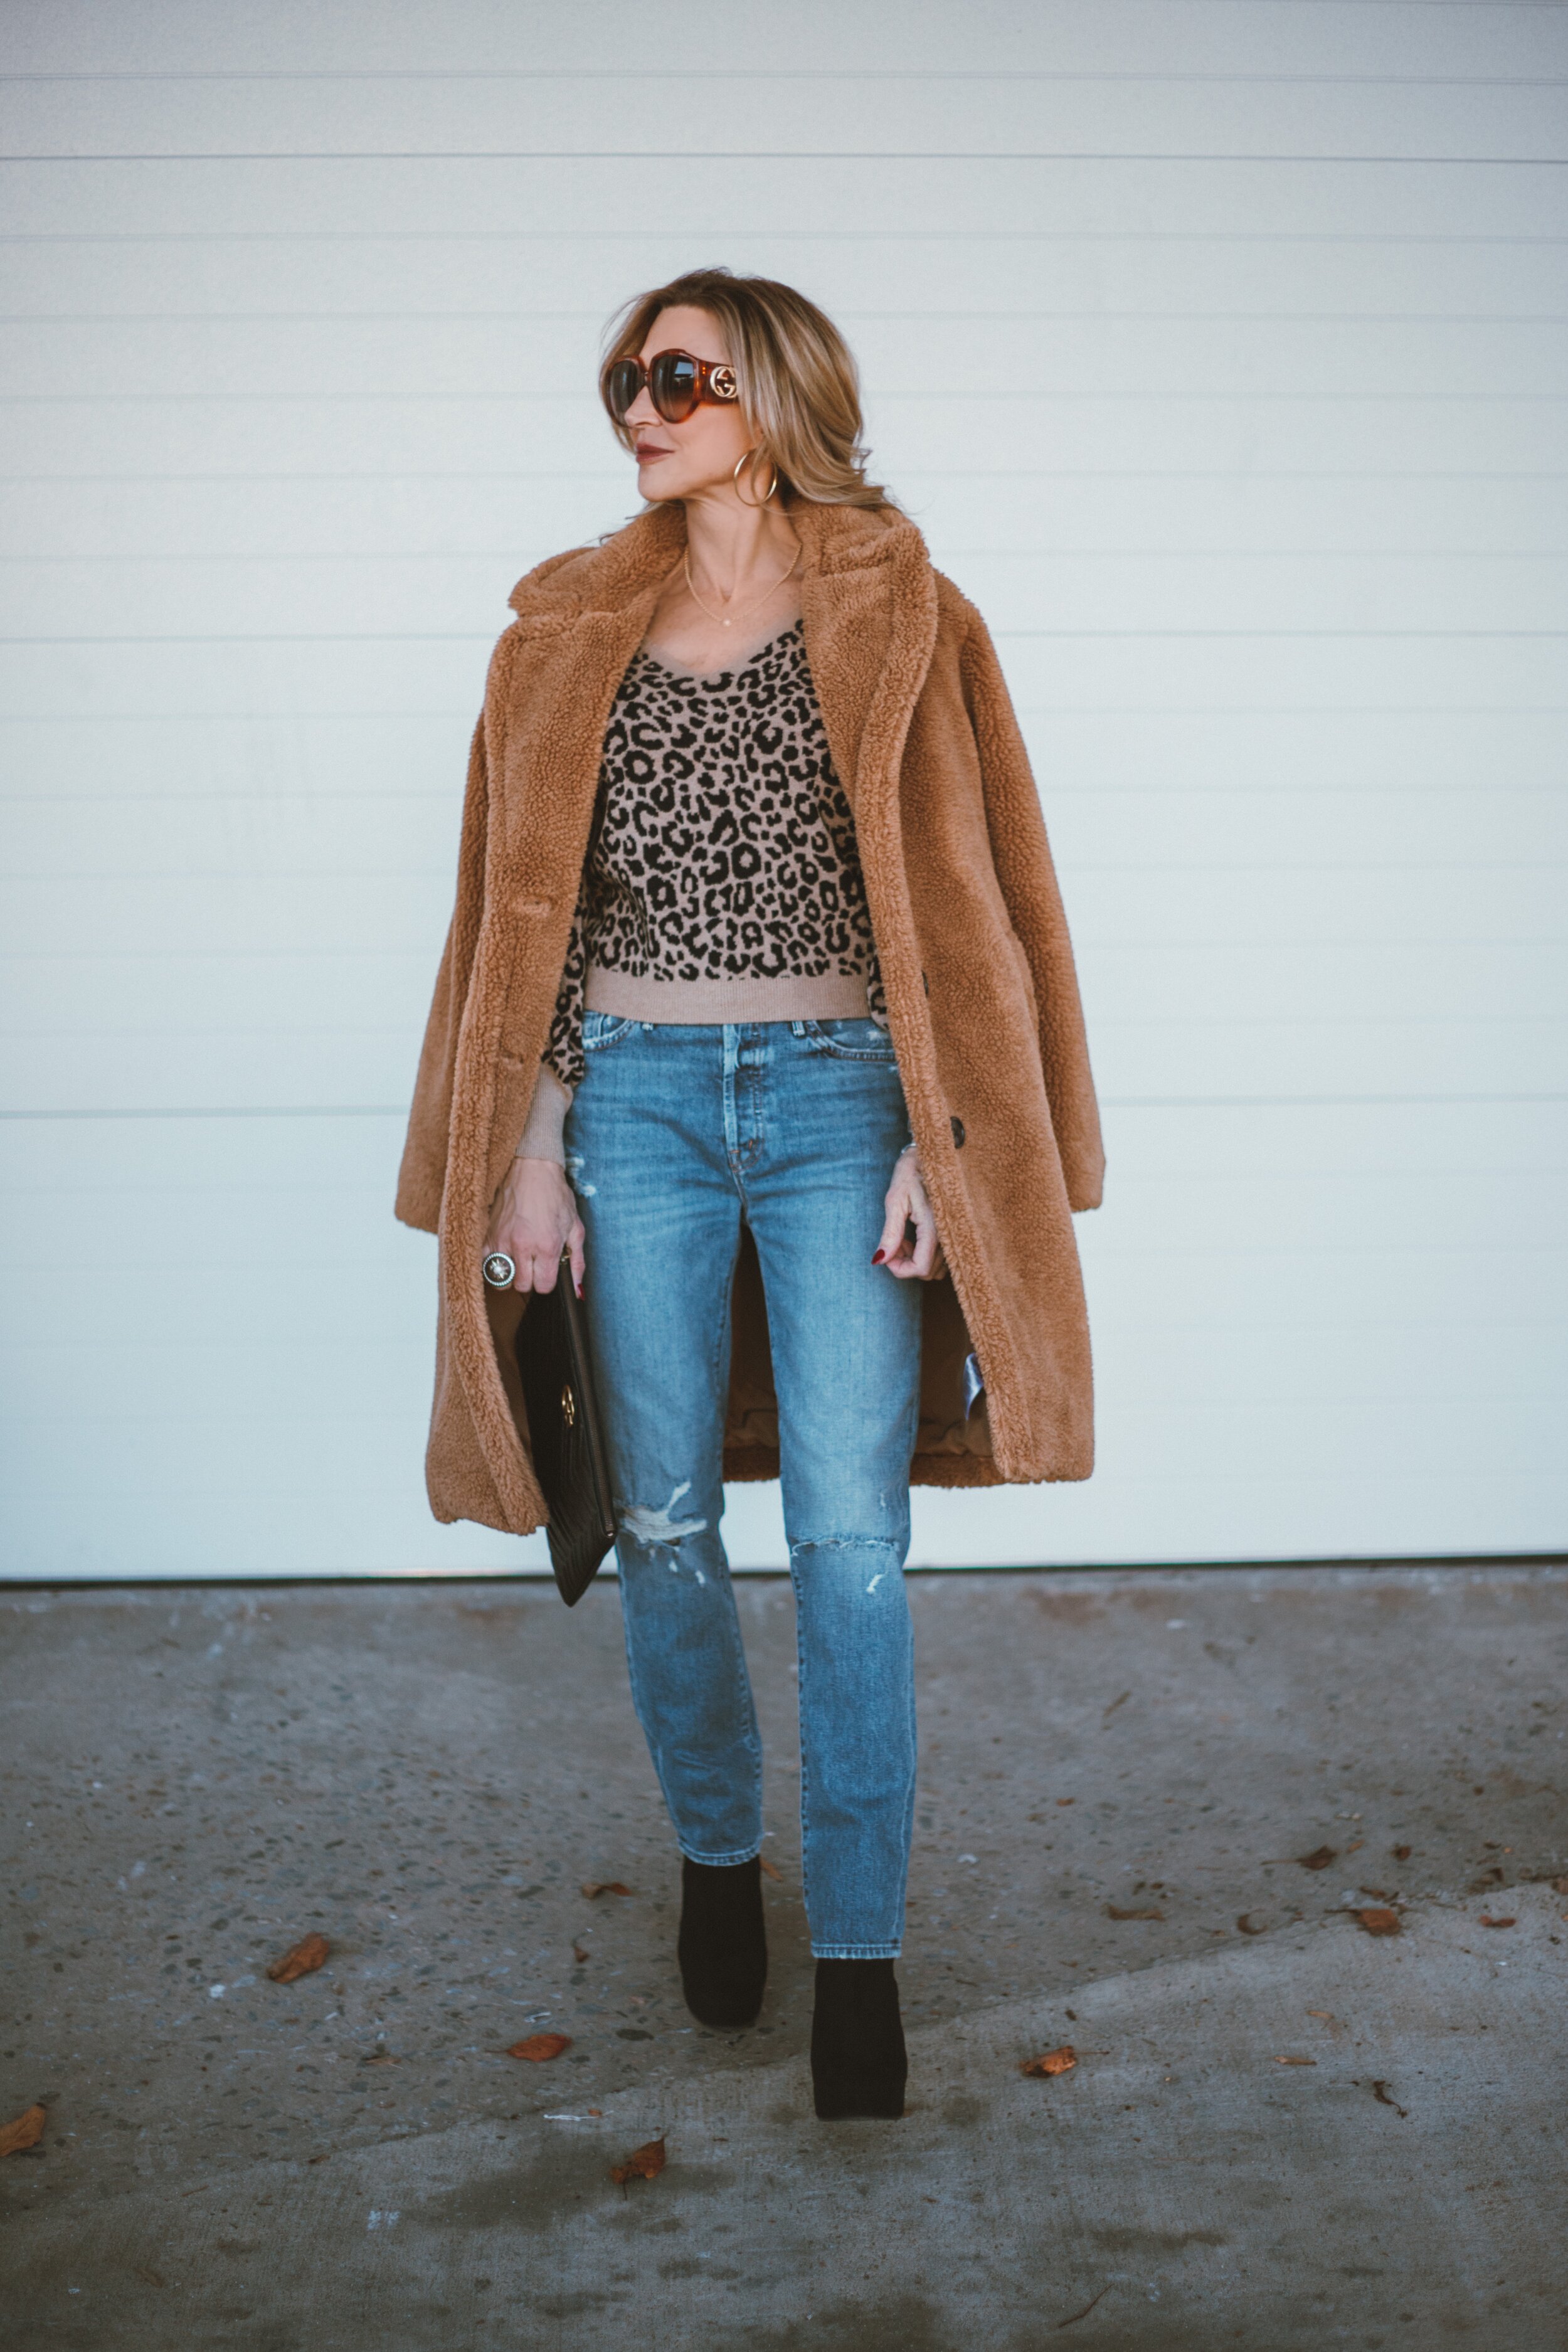 instagram teddy coat outfit